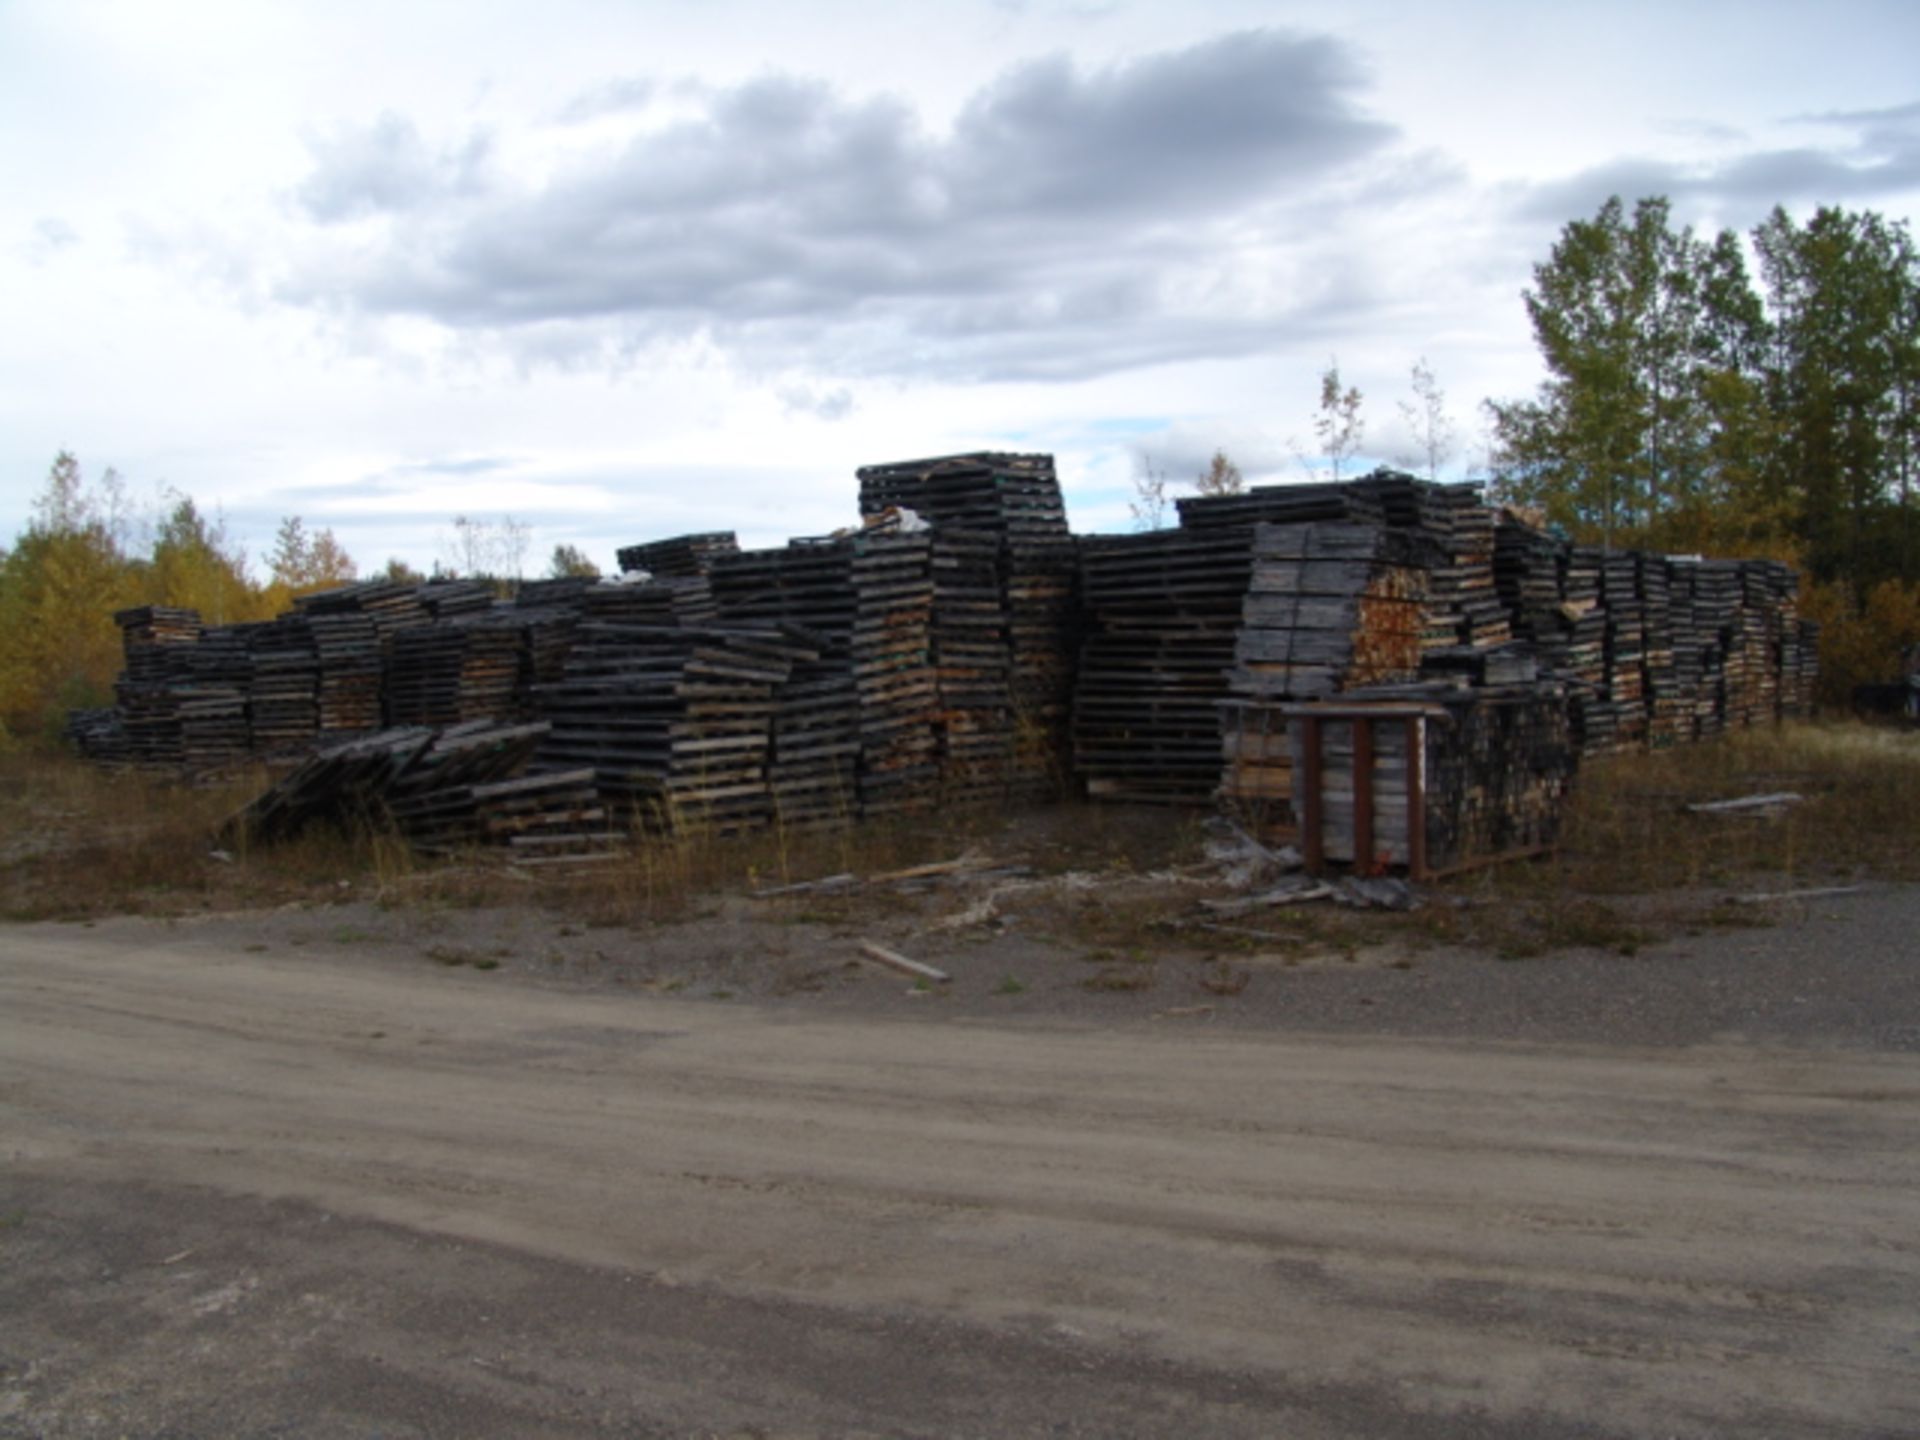 ALL PALLETS IN YARD AREA BY CHIP BINS